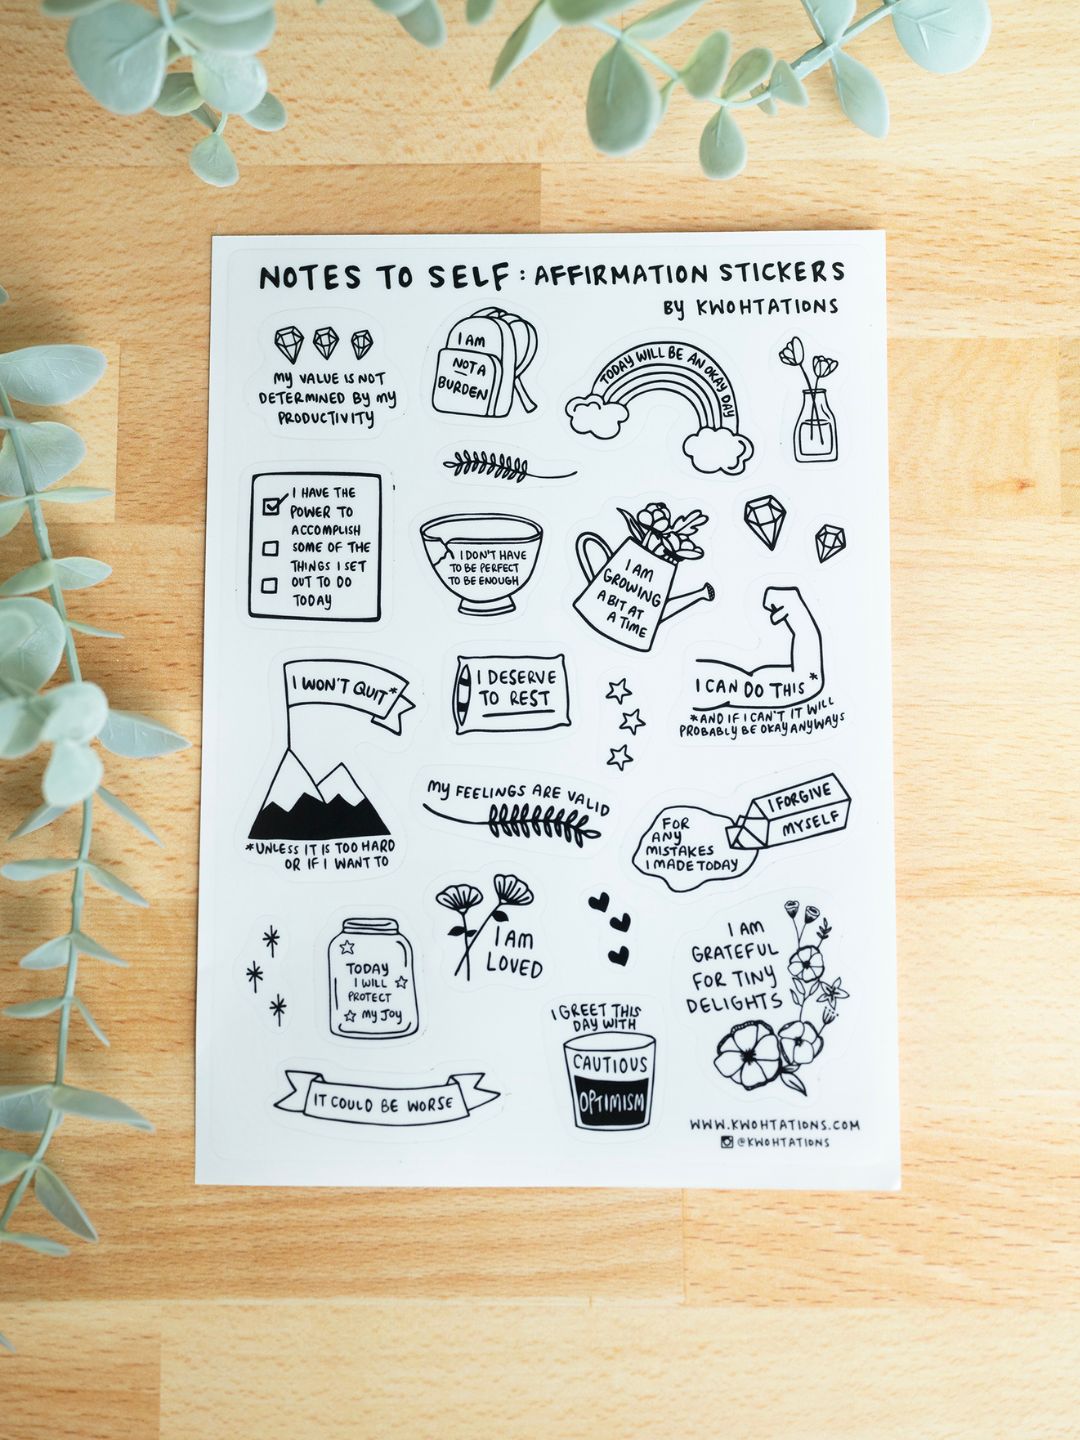 Note to Self: Positive Affirmations Sticker Sheet